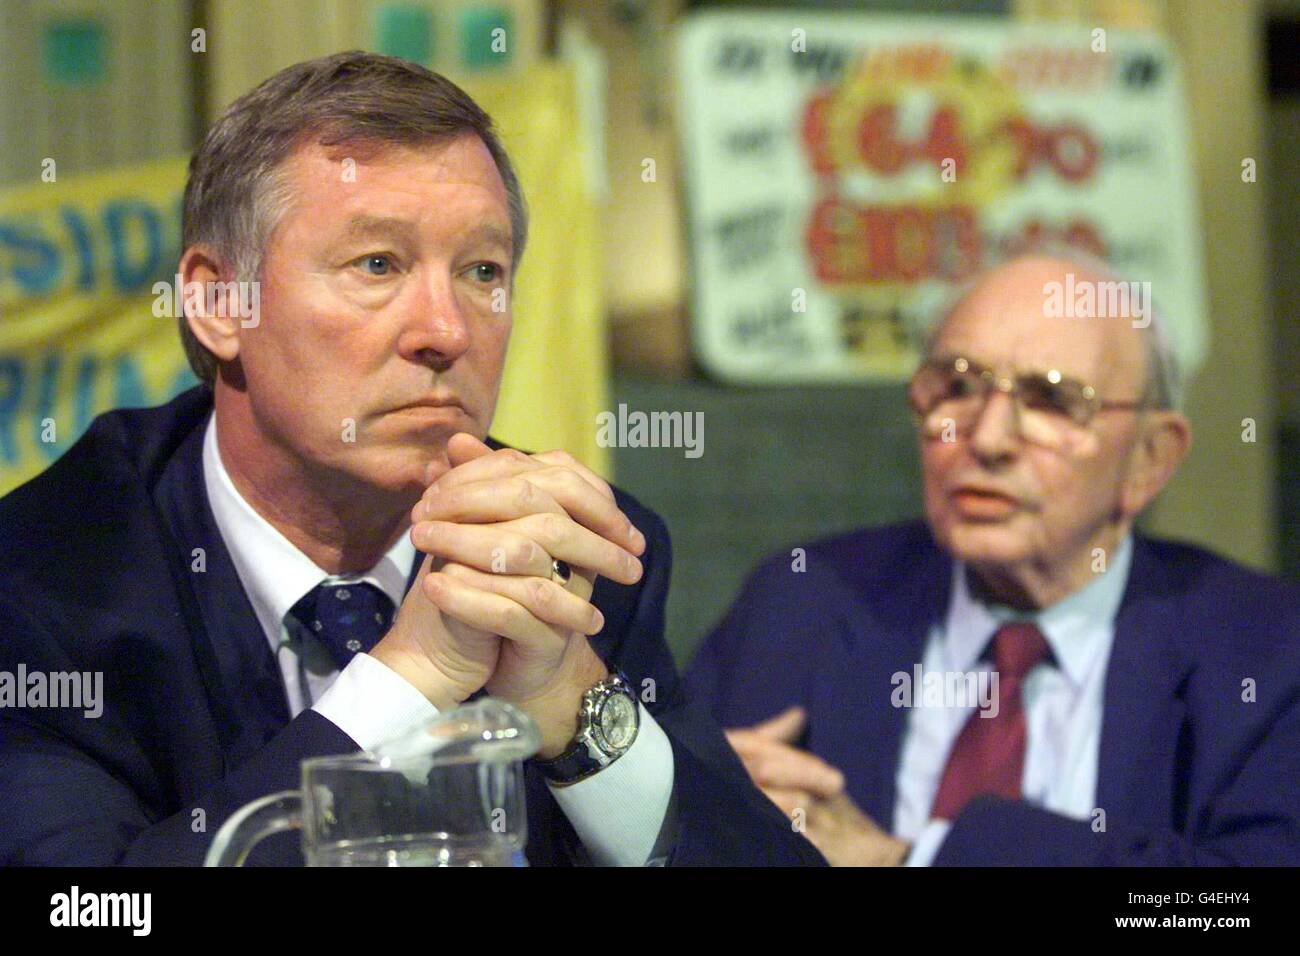 Manchester United Manager Alex Ferguson addresses a pensioners rally at the  TUC conference in Blackpool this afternoon (Sunday) as veteran trade  unionist Jack Jones looks on. PHOTO OWEN HUMPHREYS/PA Stock Photo -